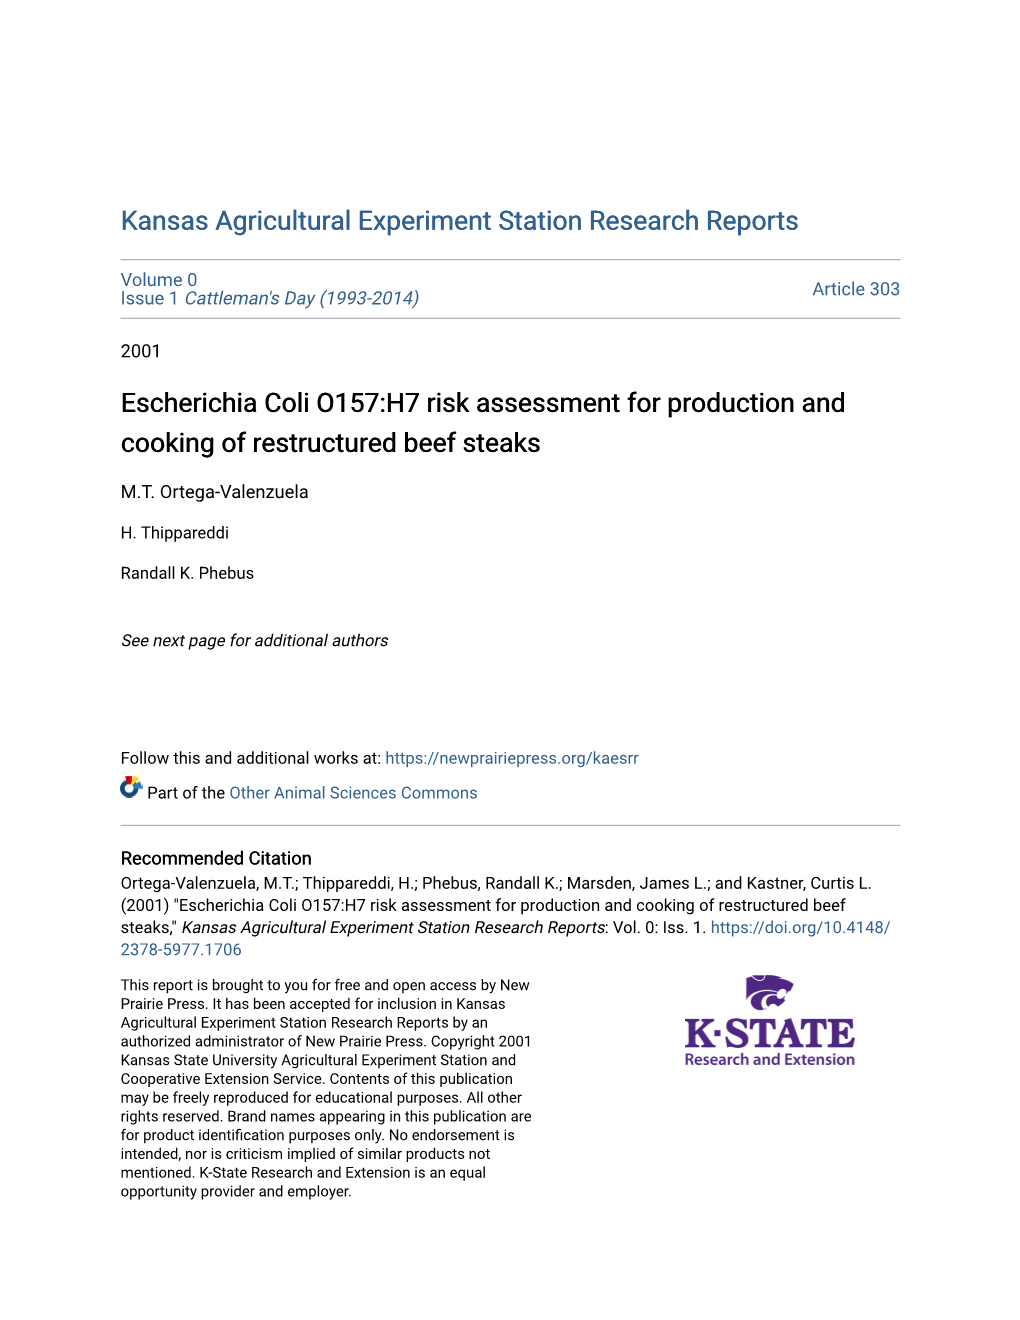 Escherichia Coli O157:H7 Risk Assessment for Production and Cooking of Restructured Beef Steaks